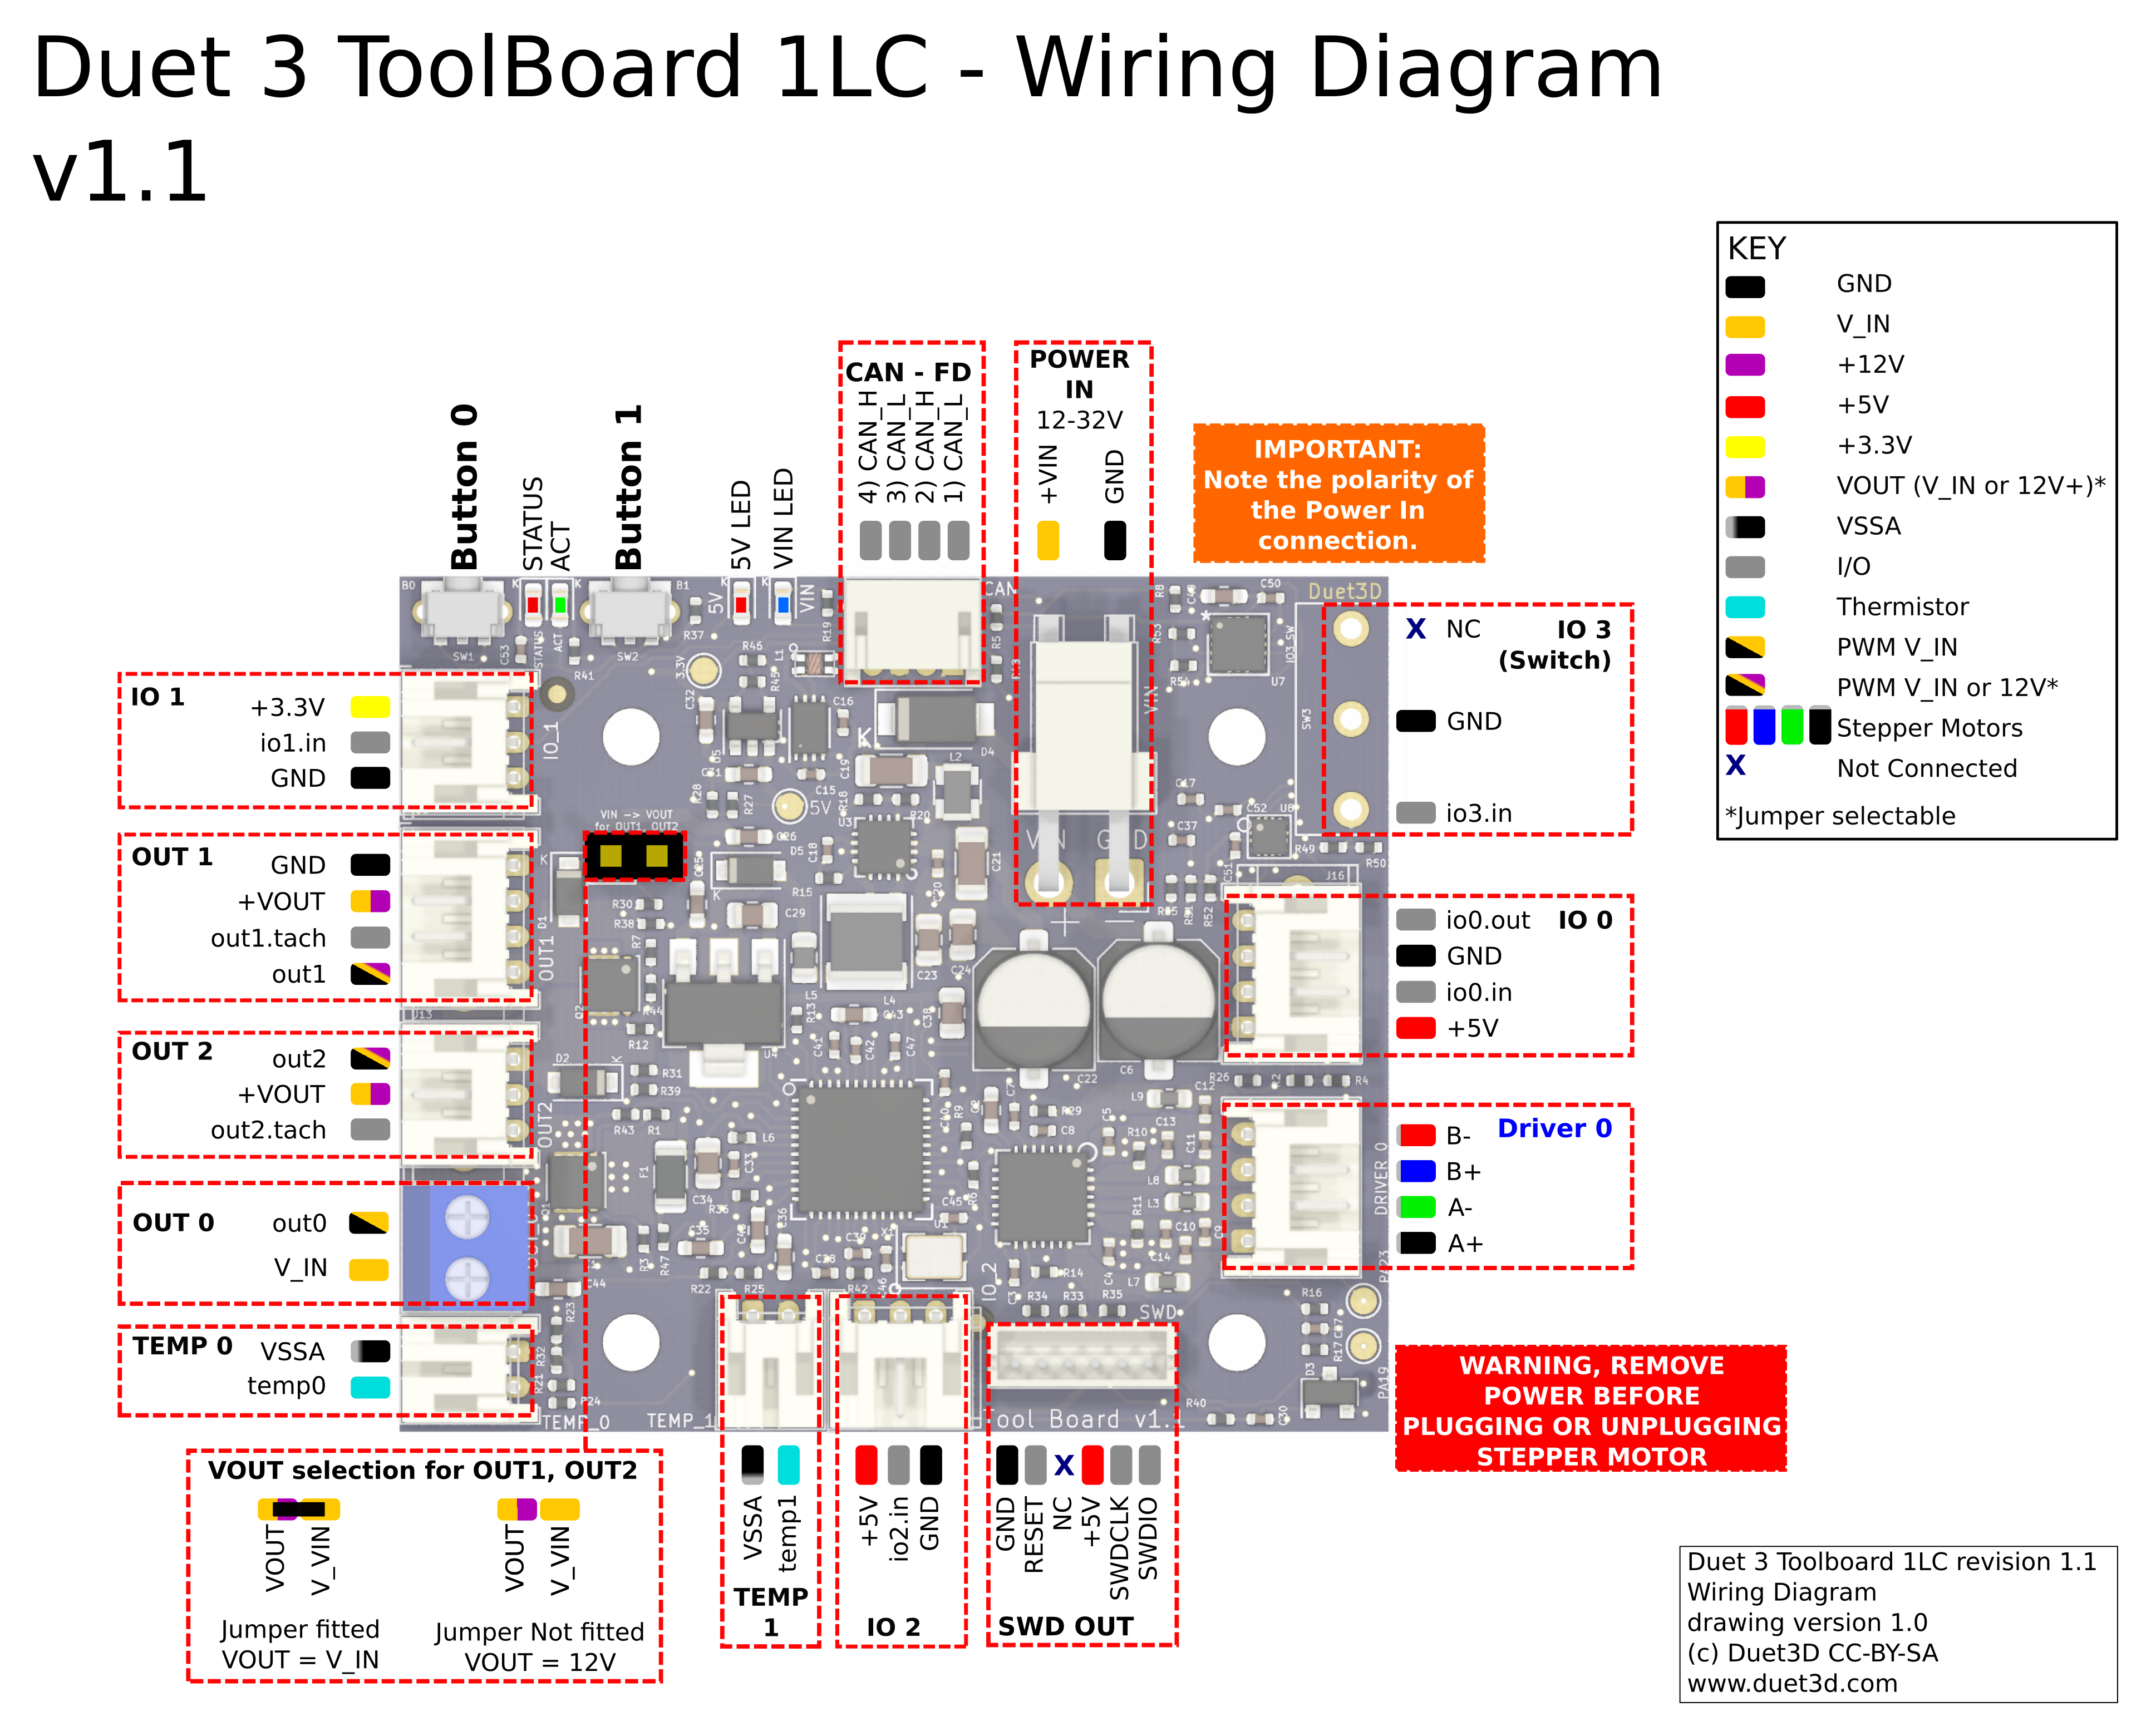 diagram showing the pinout for each of the headers on the Duet 3 toolboard 1LC v1.1